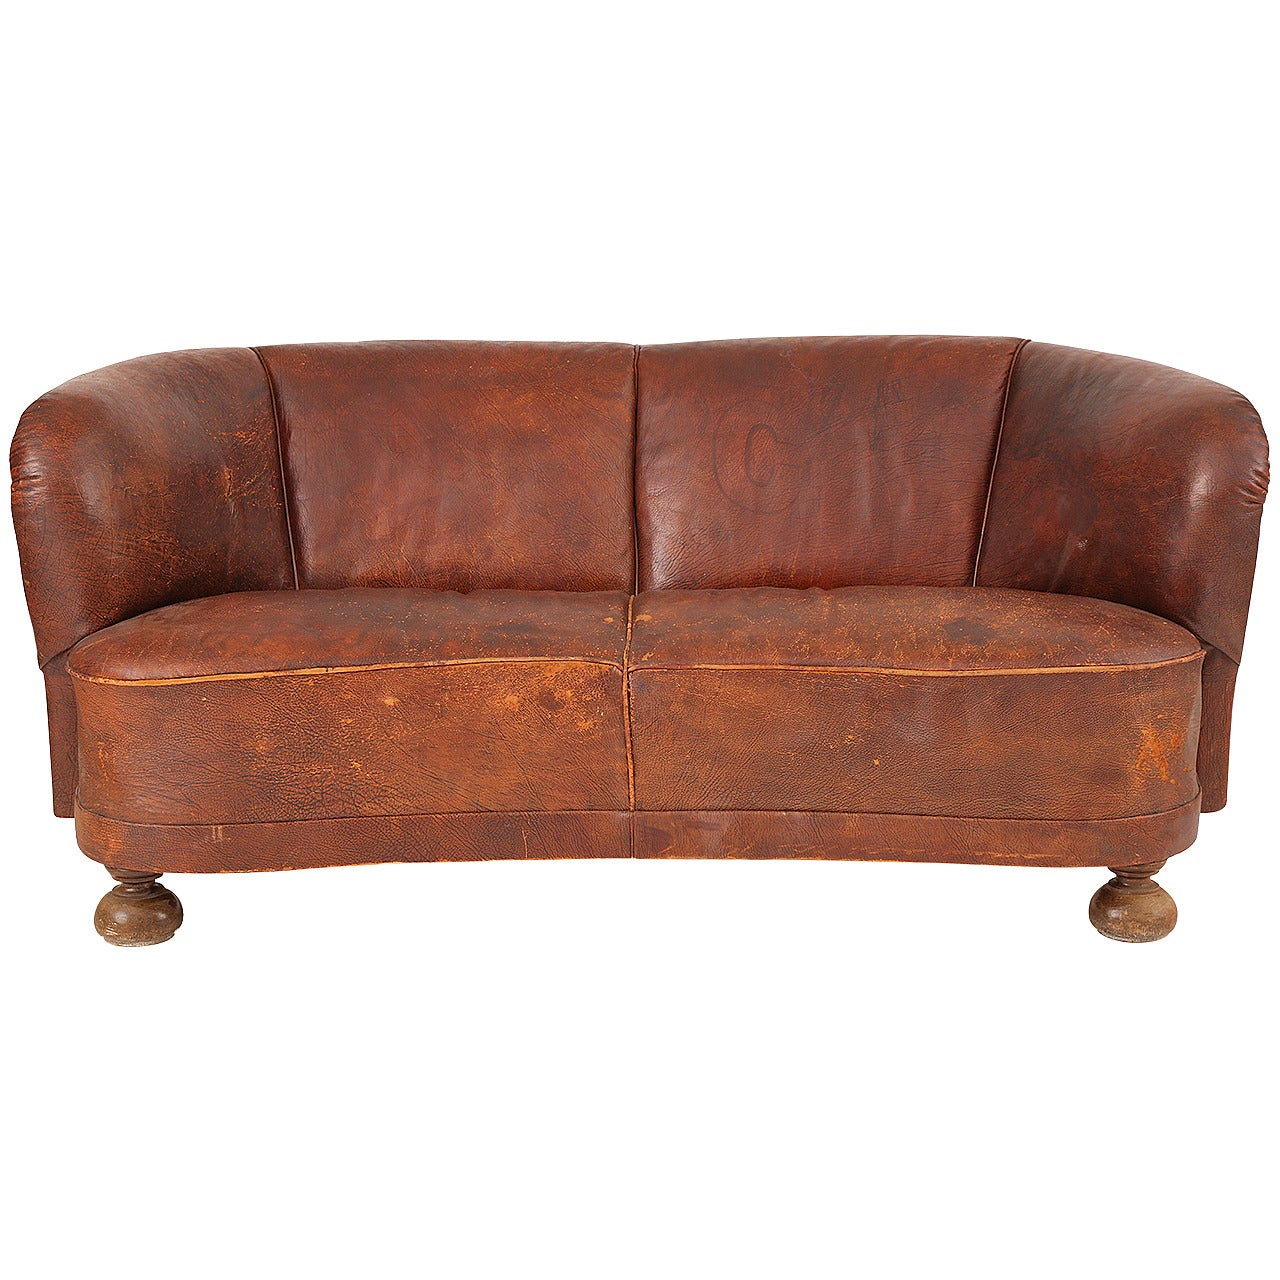 1930s Free-Form Danish Leather Sofa After Flemming Lassen